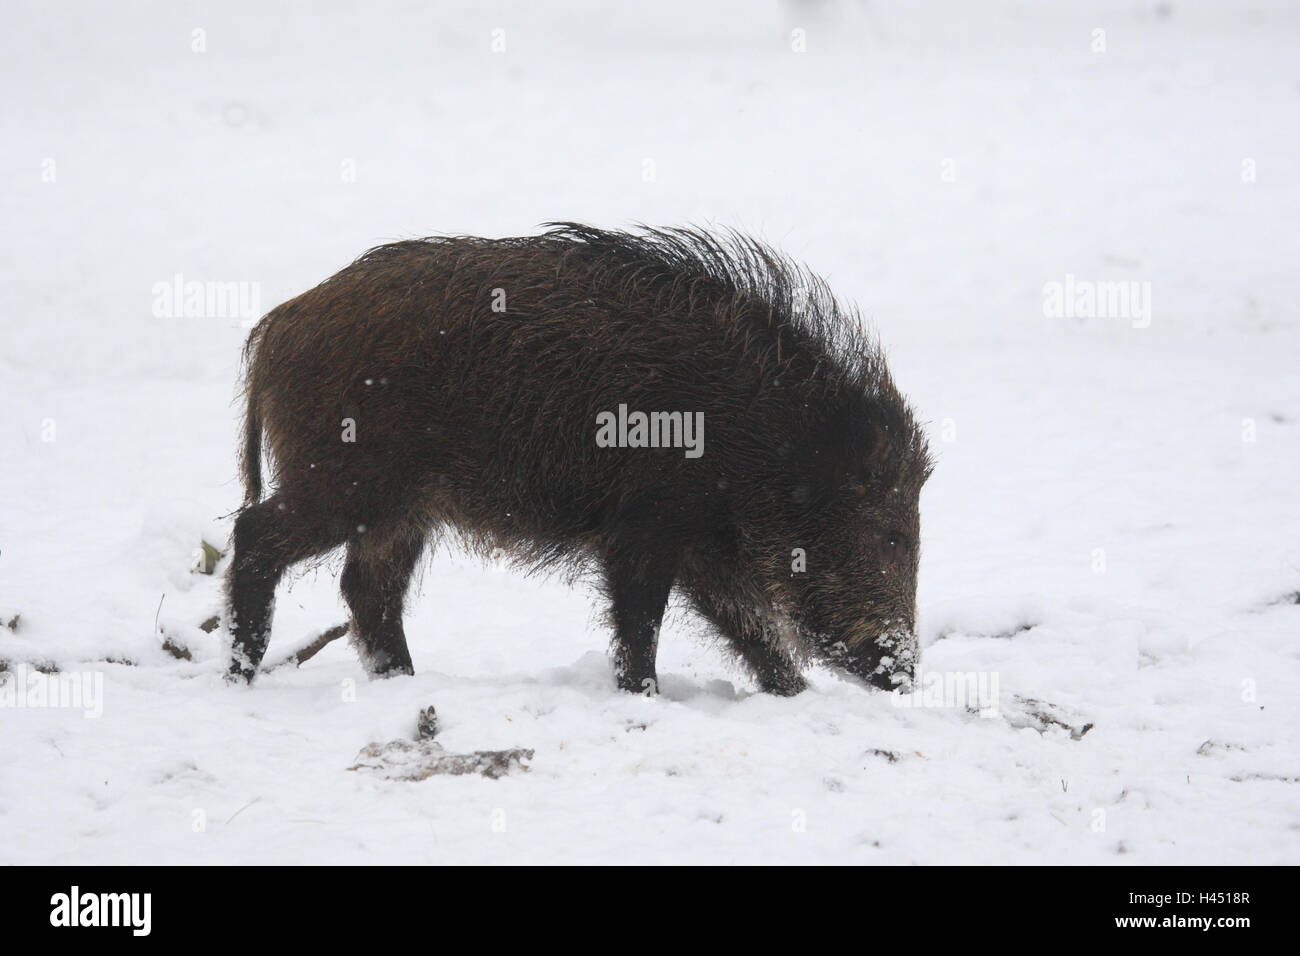 Wild boar, young animal, winter, landscape format, mammal, animal, wild animal, pig, cloven-hoofed animal, side view, snow, lining search, winter, Wildlife, Germany, Stock Photo